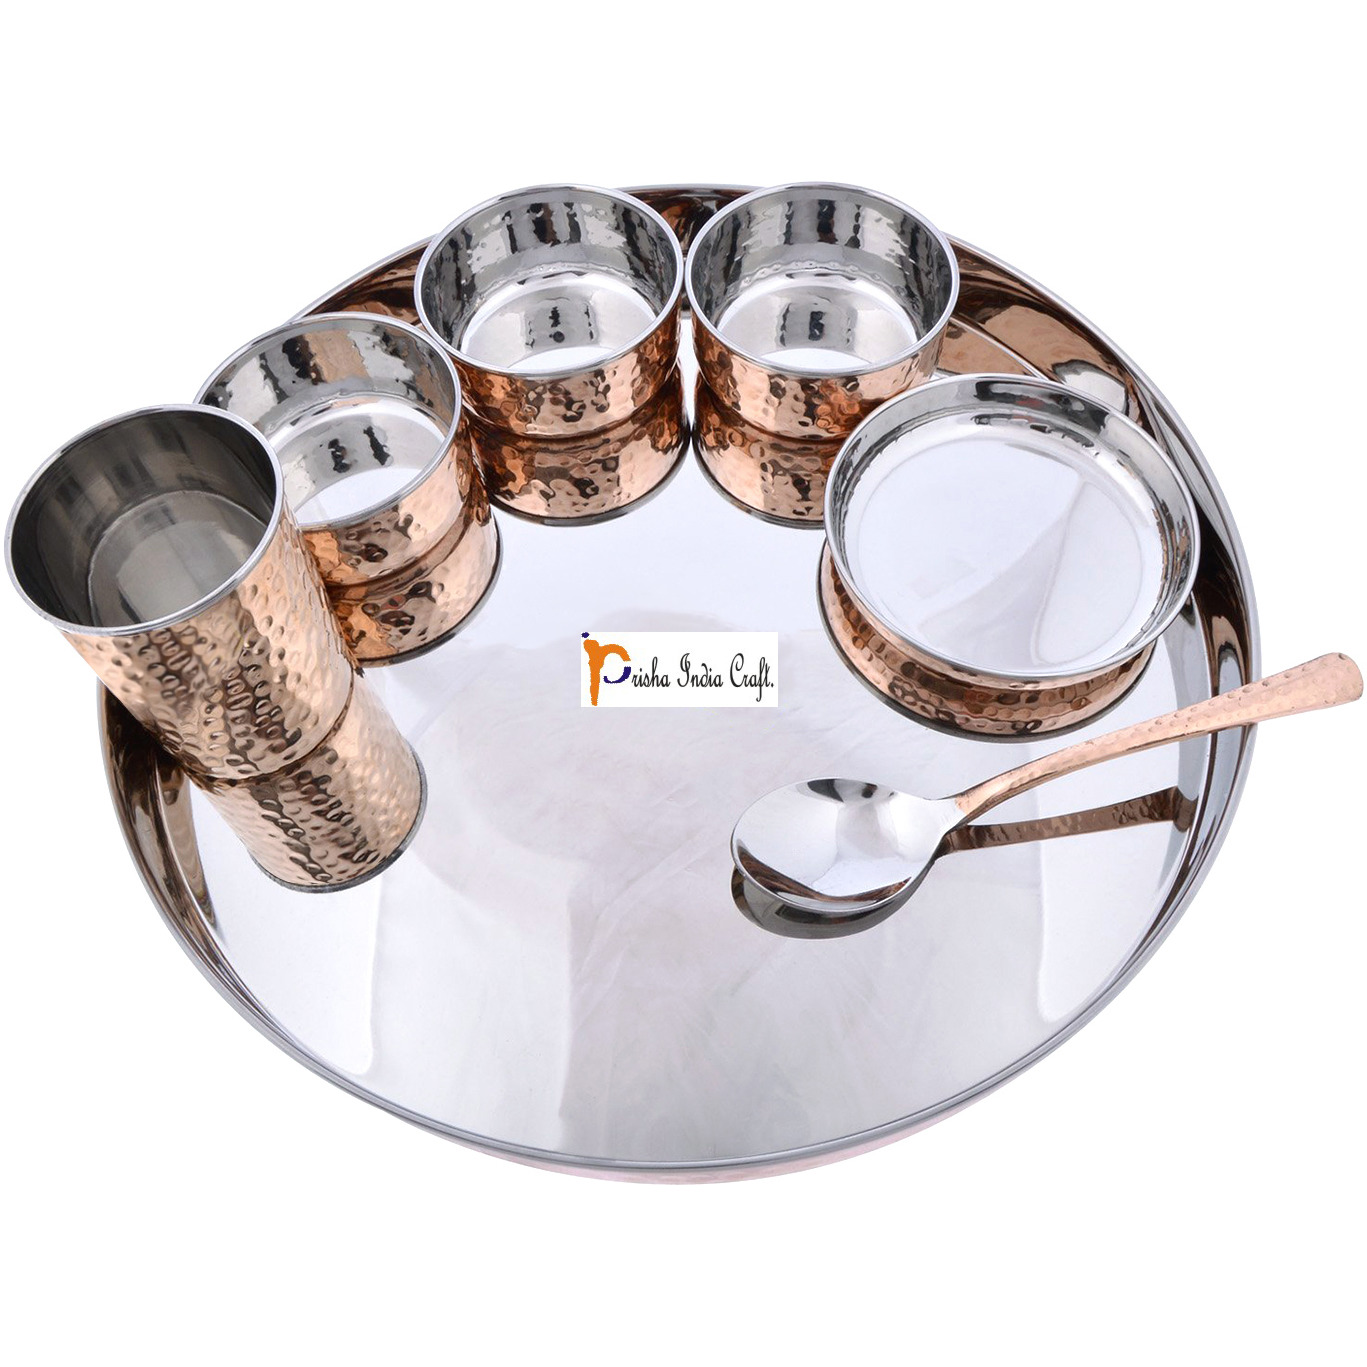 Prisha India Craft B. Set of 5 Dinnerware Traditional Stainless Steel Copper Dinner Set of Thali Plate, Bowls, Glass and Spoon, Dia 13  With 1 Pure Copper Classic Pitcher Jug - Christmas Gift